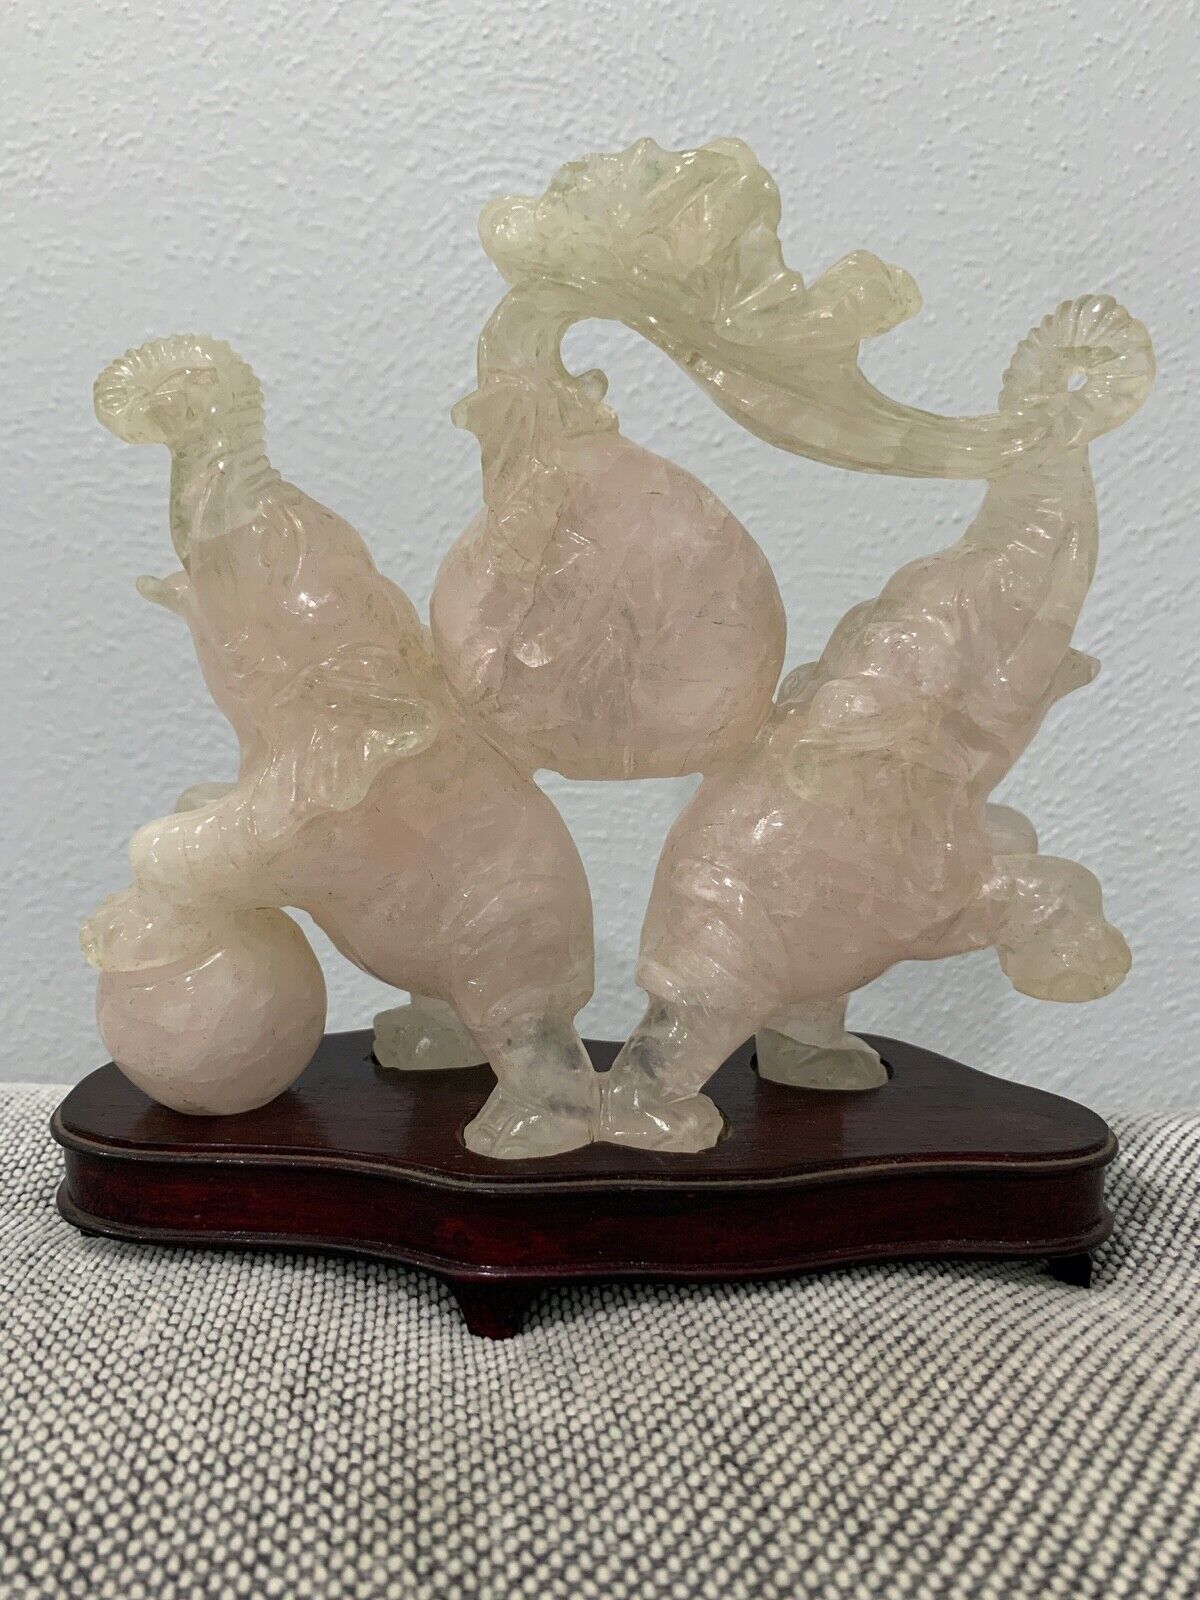 Vintage Possibly Antique Chinese Rose Quartz Elephants & Ball Figurines Statues